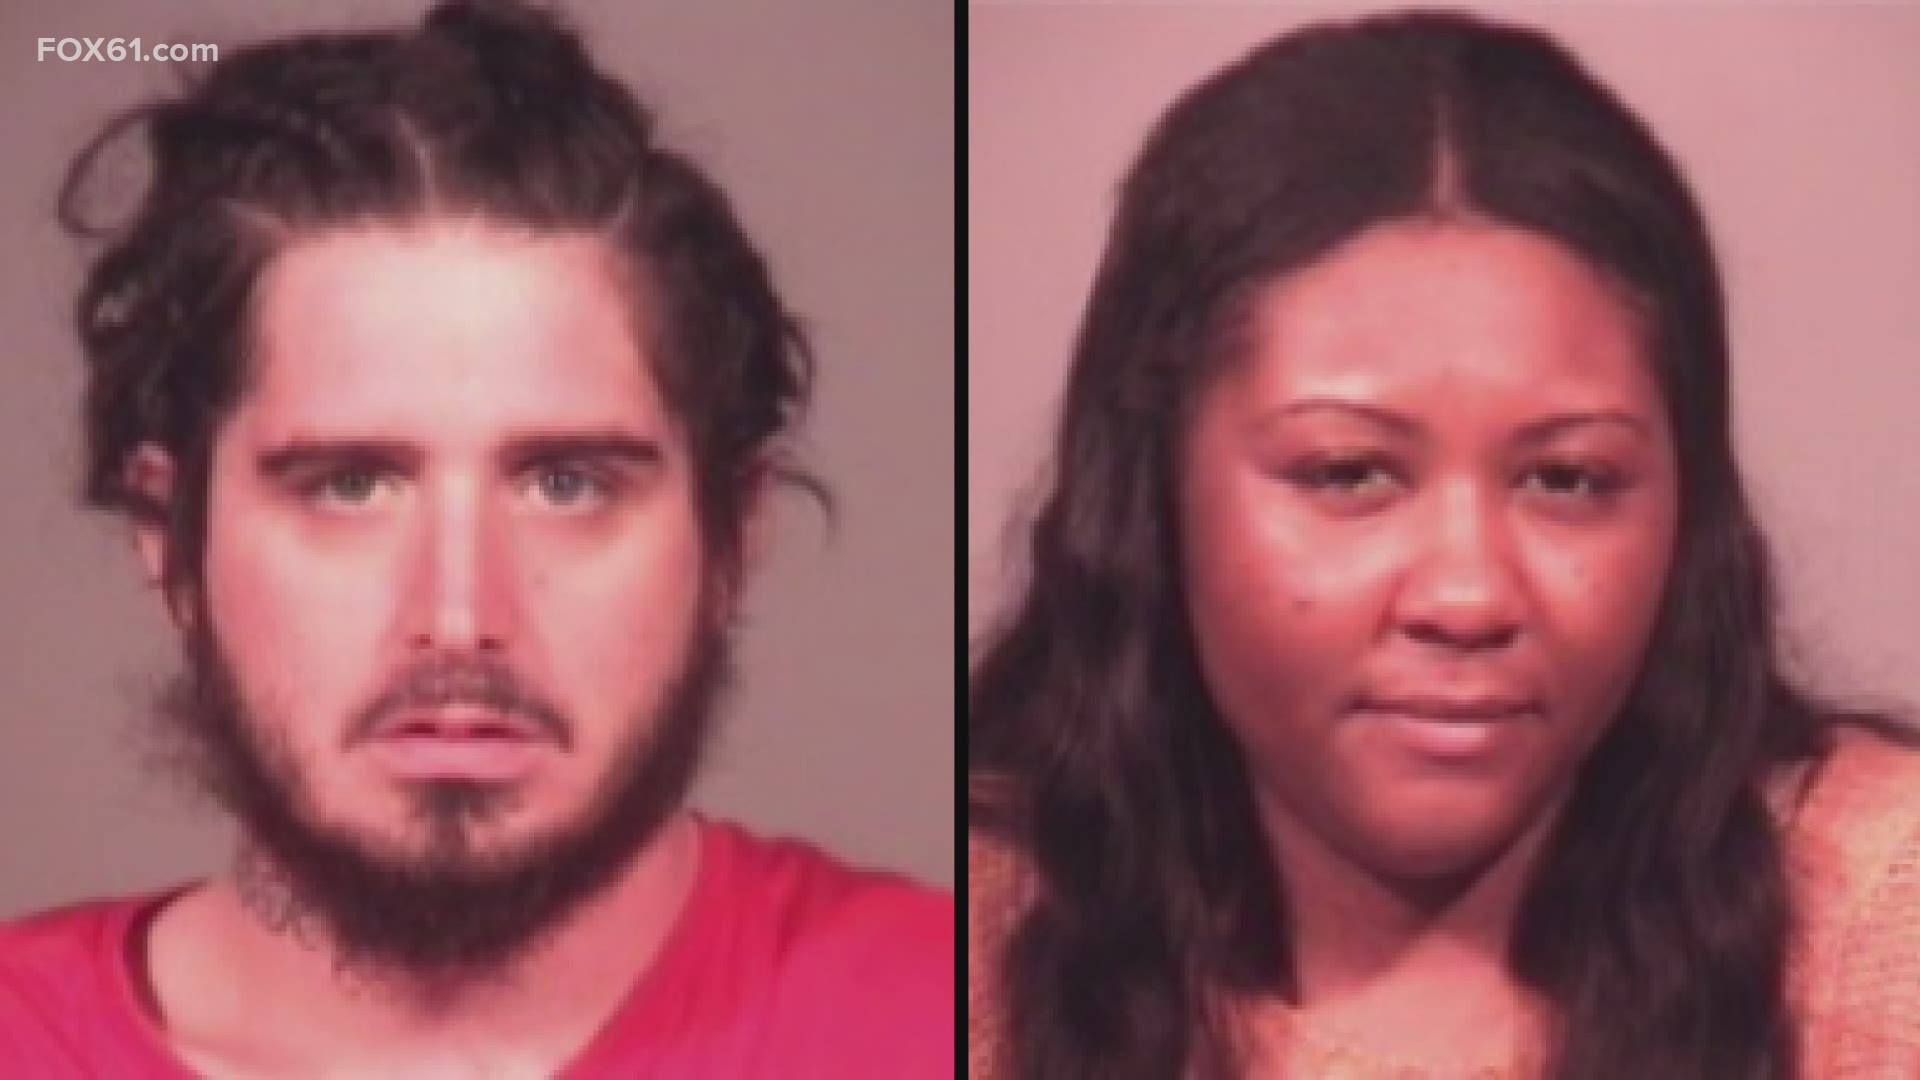 2 people arrested in connection with Meriden home invasion fox61